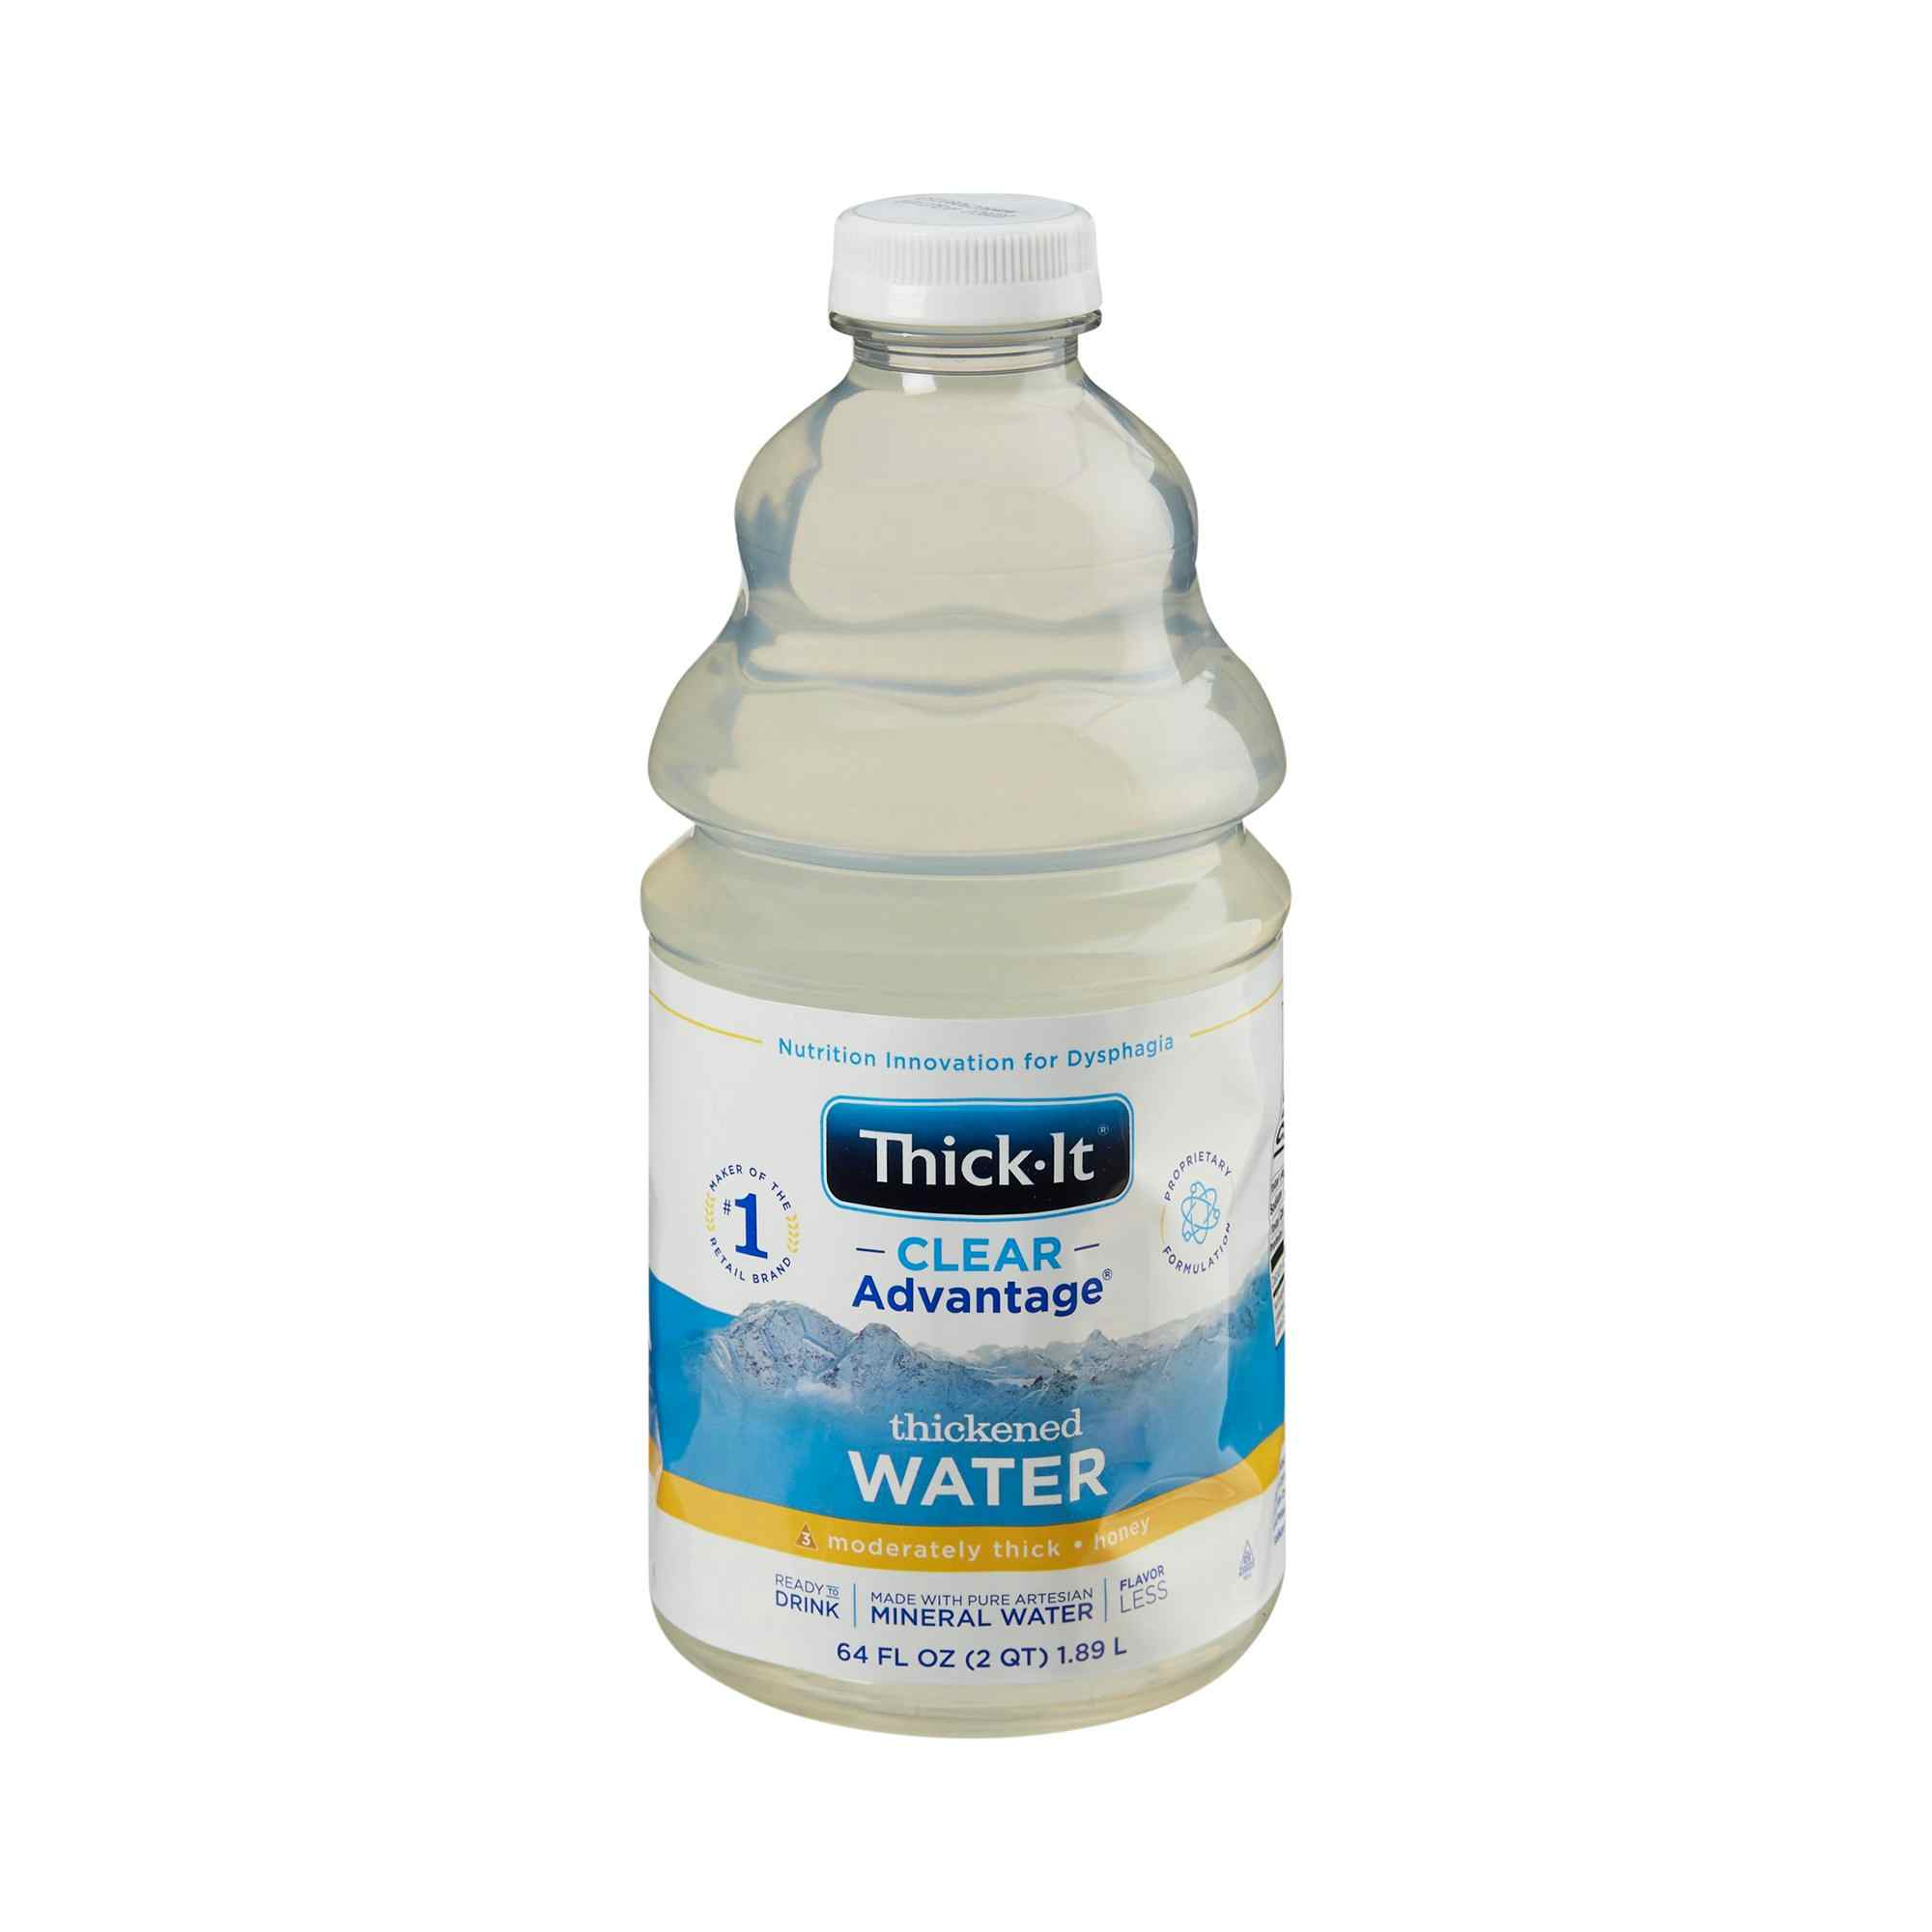 Thick-It Clear Advantage Thickened Water, Honey Consistency, Moderately Thick, B452-A5044, 64 oz. - Case of 4